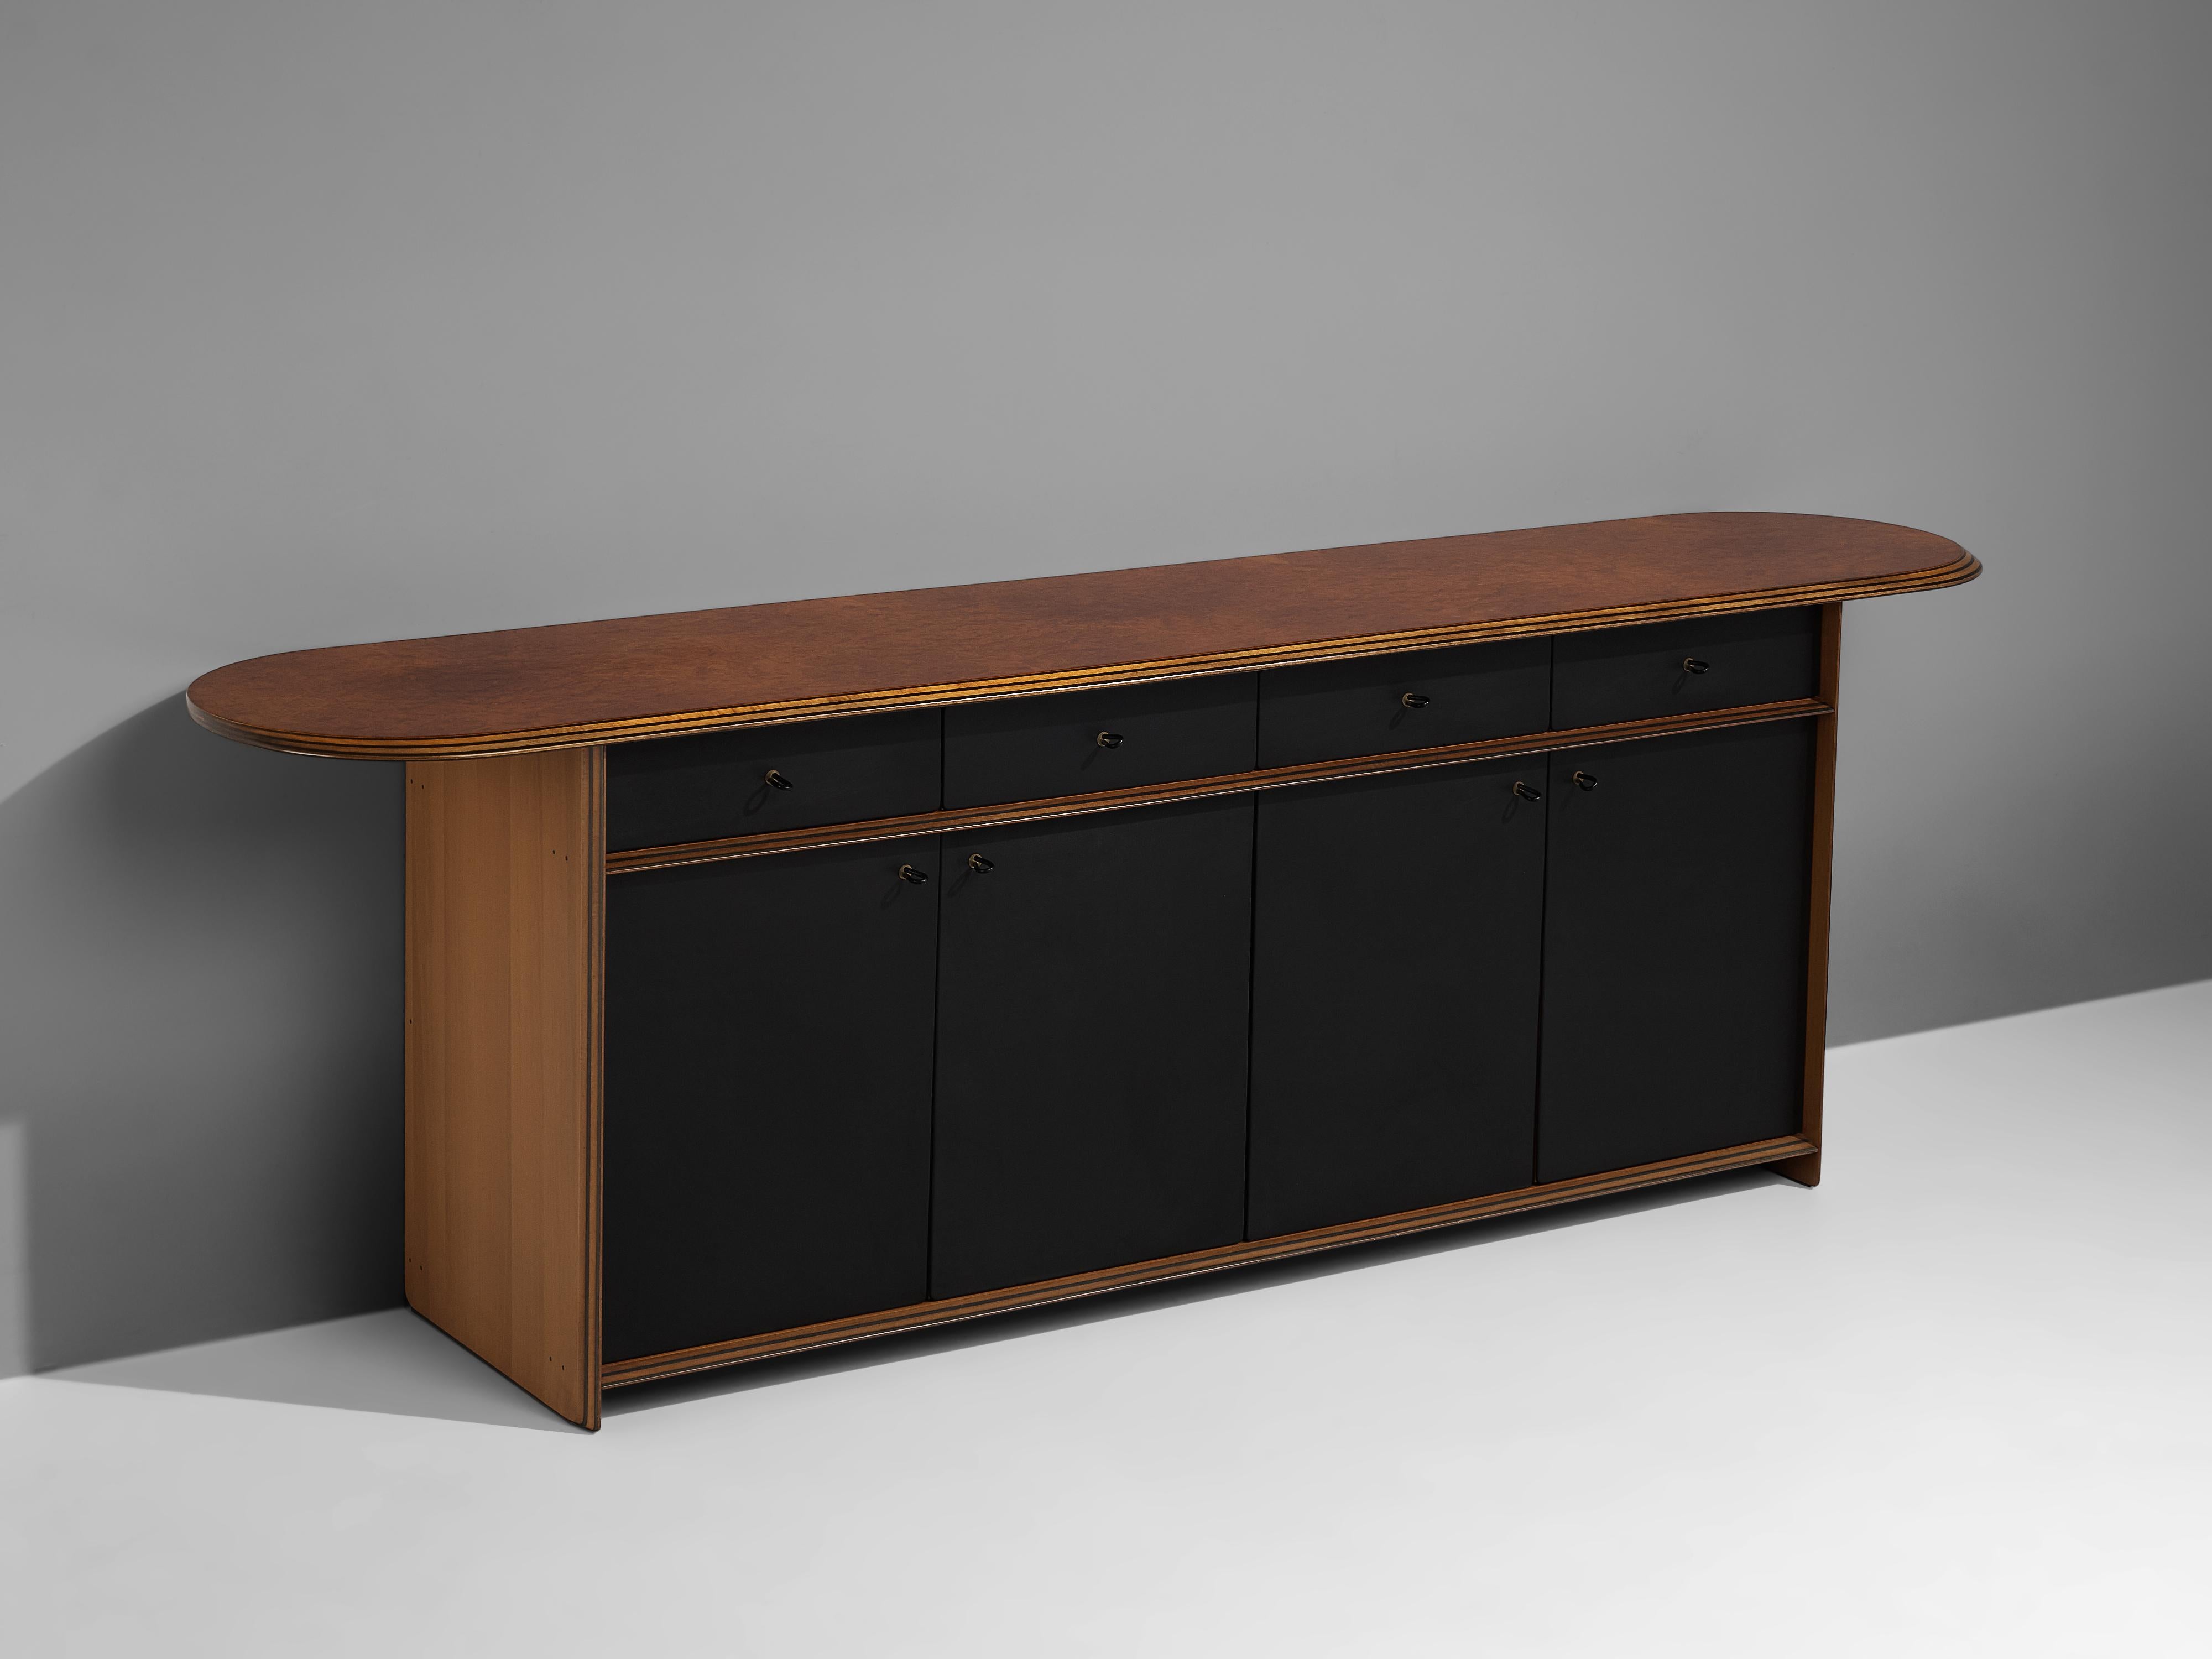 Afra & Tobia Scarpa, sideboard, walnut, leather, Italy, 1970s

This sideboard with a leather front is designed as part of the ‘Artona’ line by Afra & Tobia Scarpa. It features a top with vivid burl wood and overhanging round ends. Four drawers and